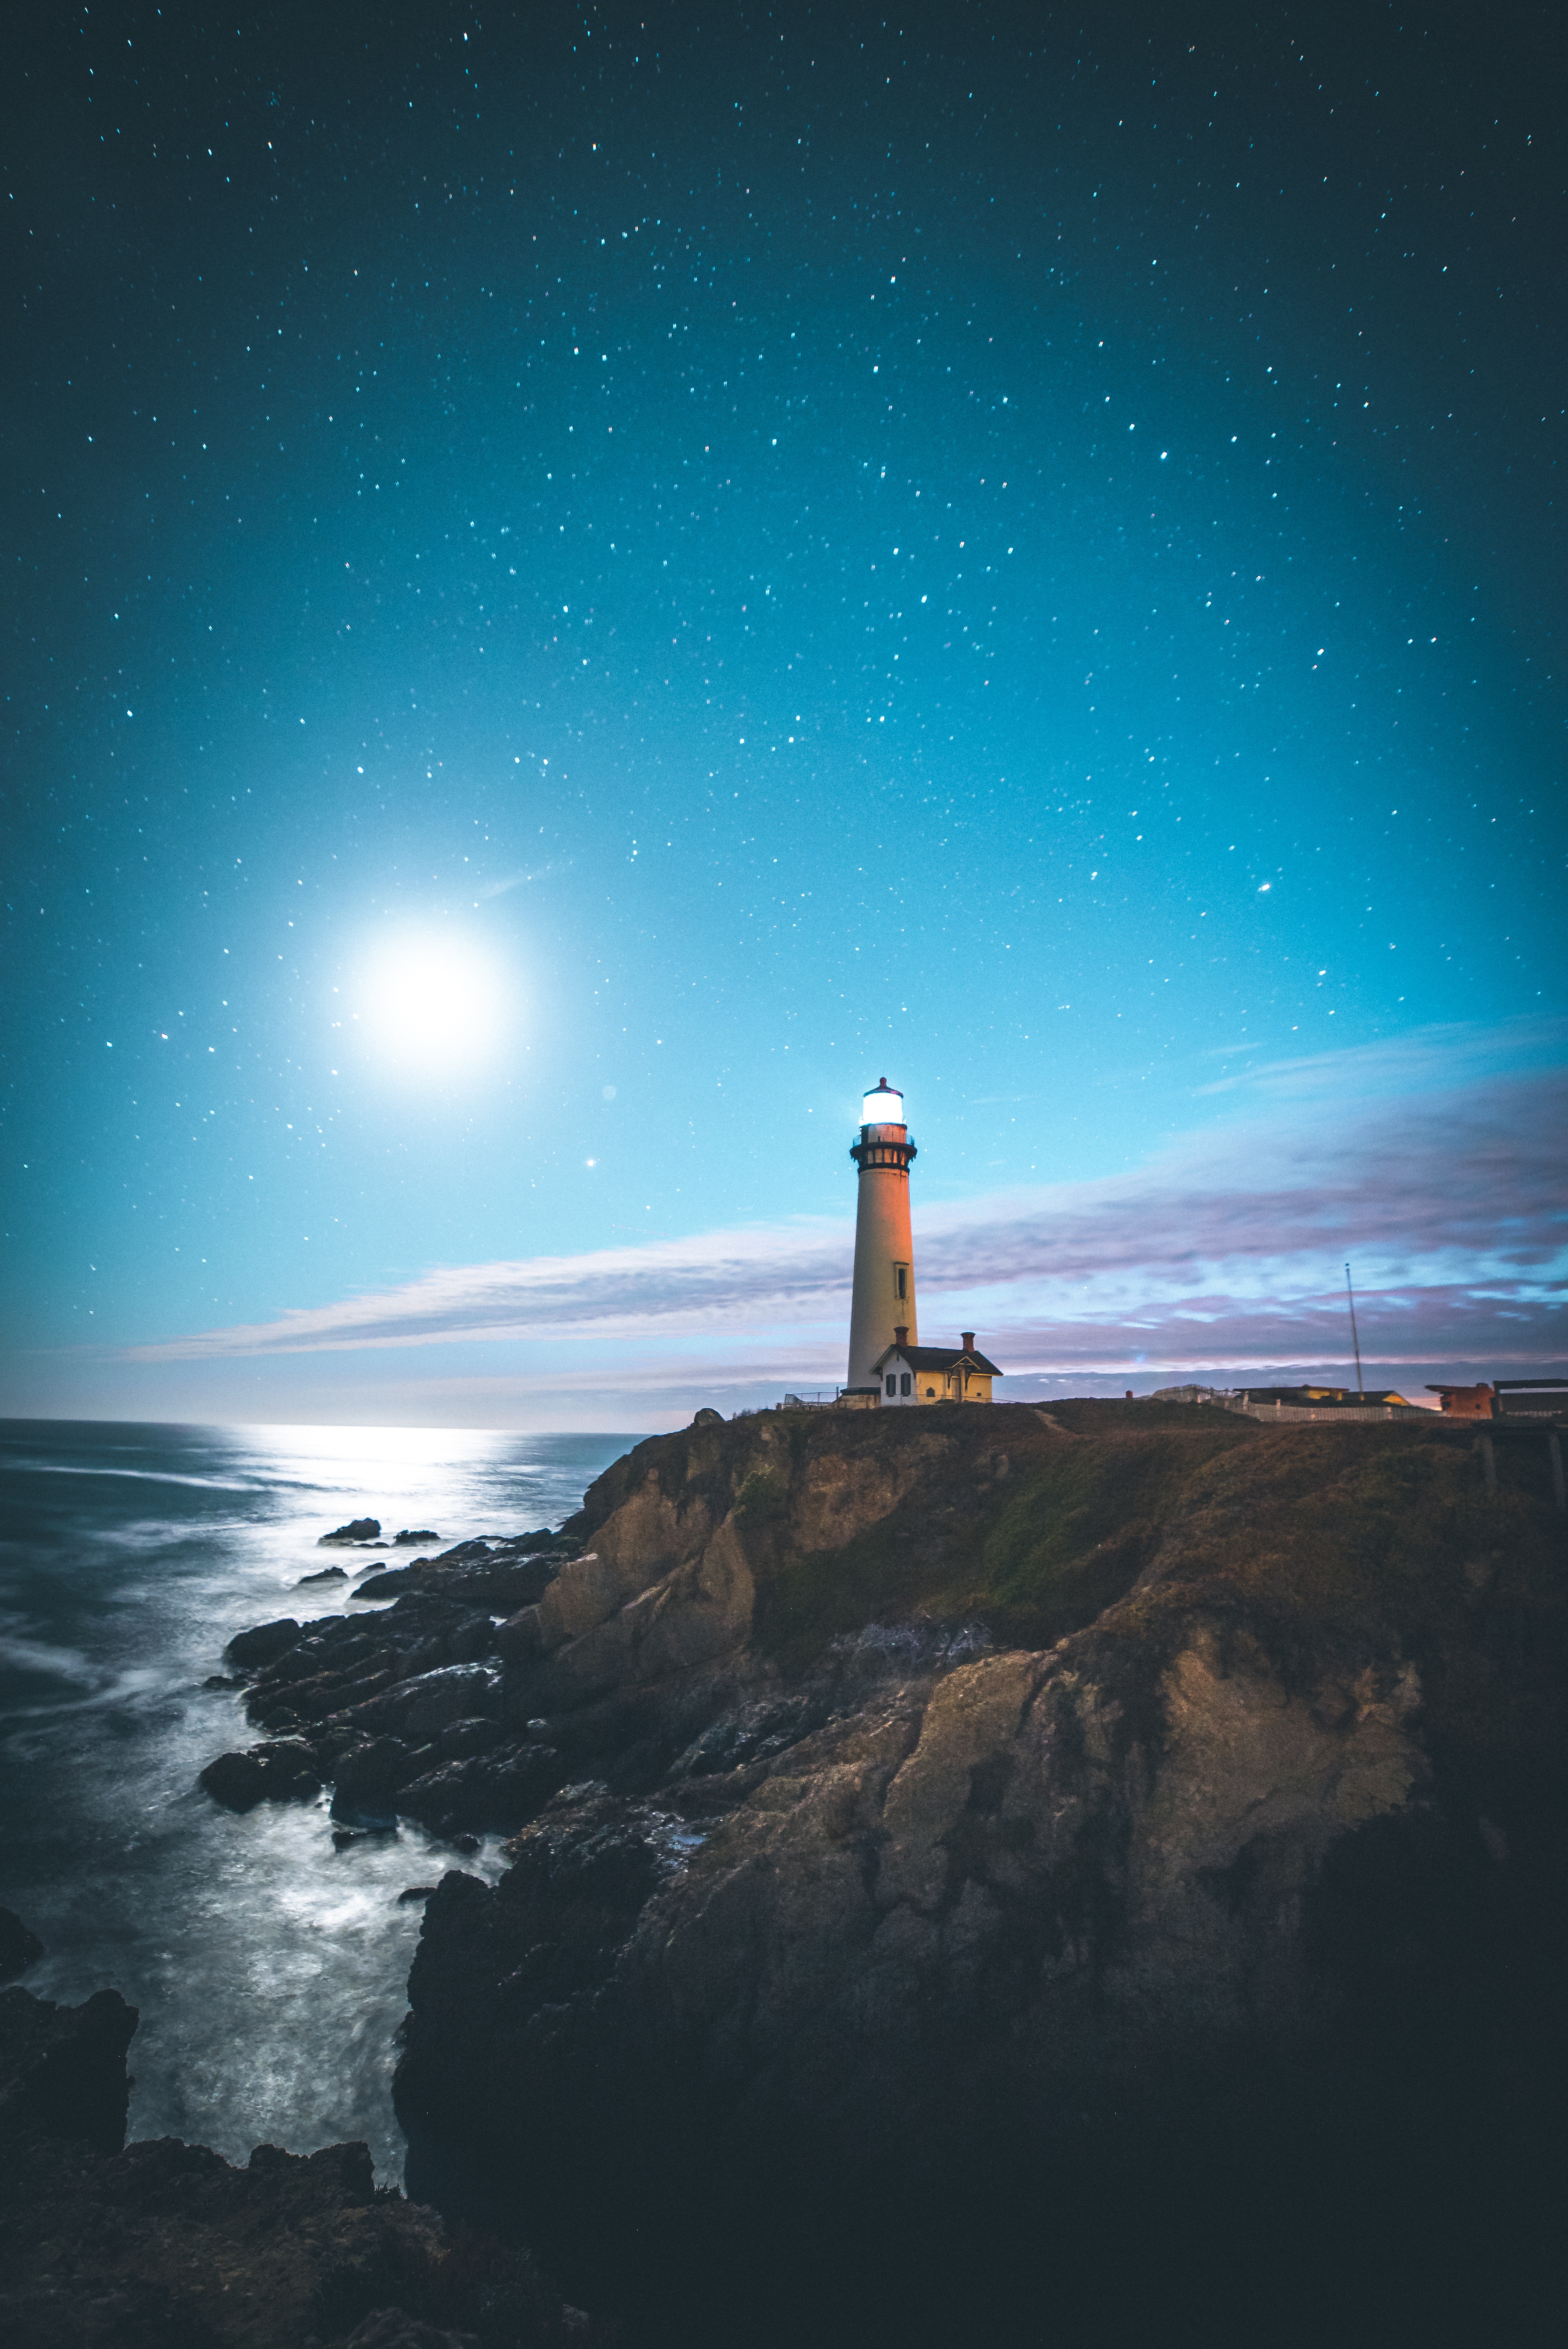 bank, united states, starry sky, shore, nature, usa, lighthouse, pescadero iphone wallpaper